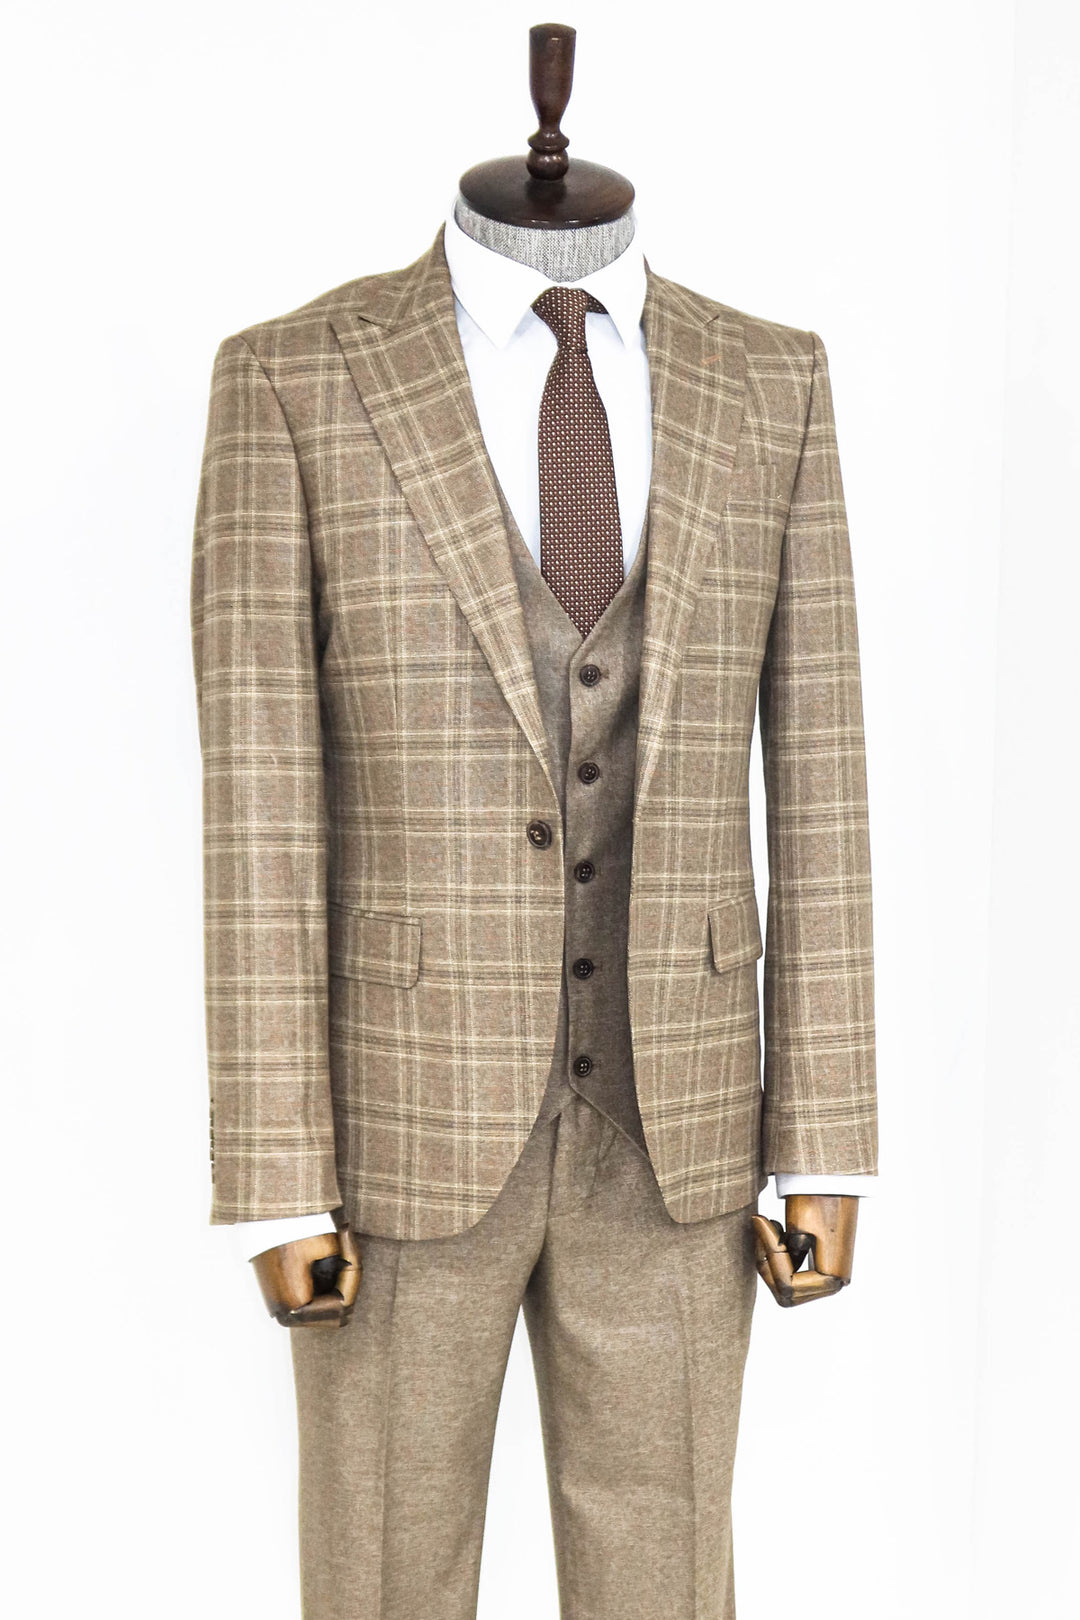 Checked Slim Fit Brown Men Suit and Shirts Combination- Wessi